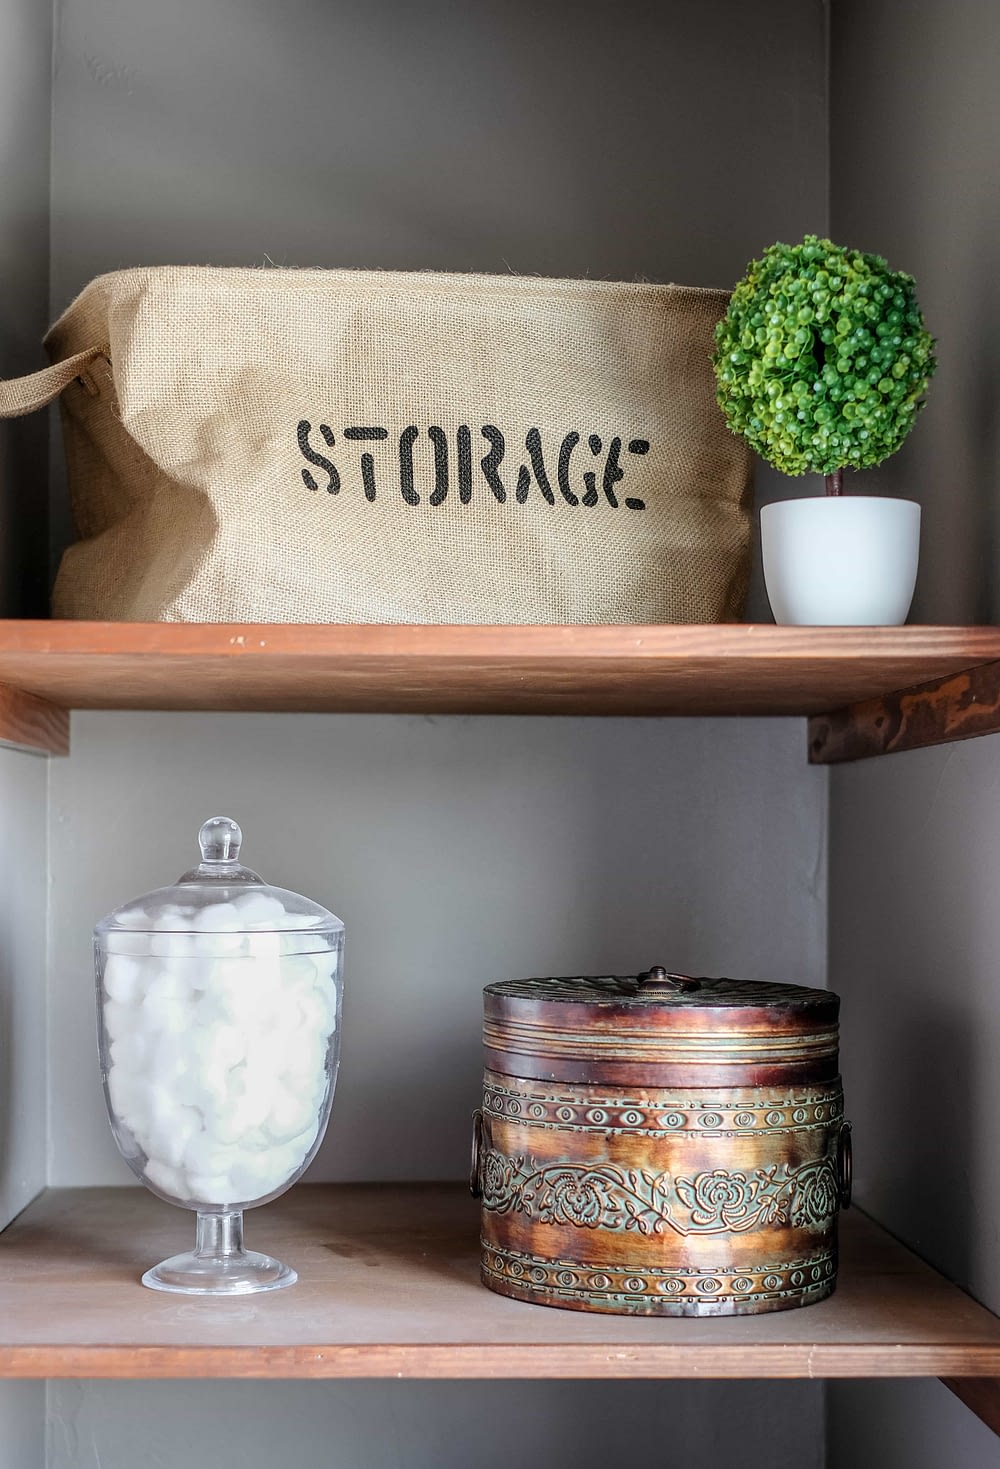 bathroom linens shelves styled with burlap, greenery, and a glass jar for cotton balls